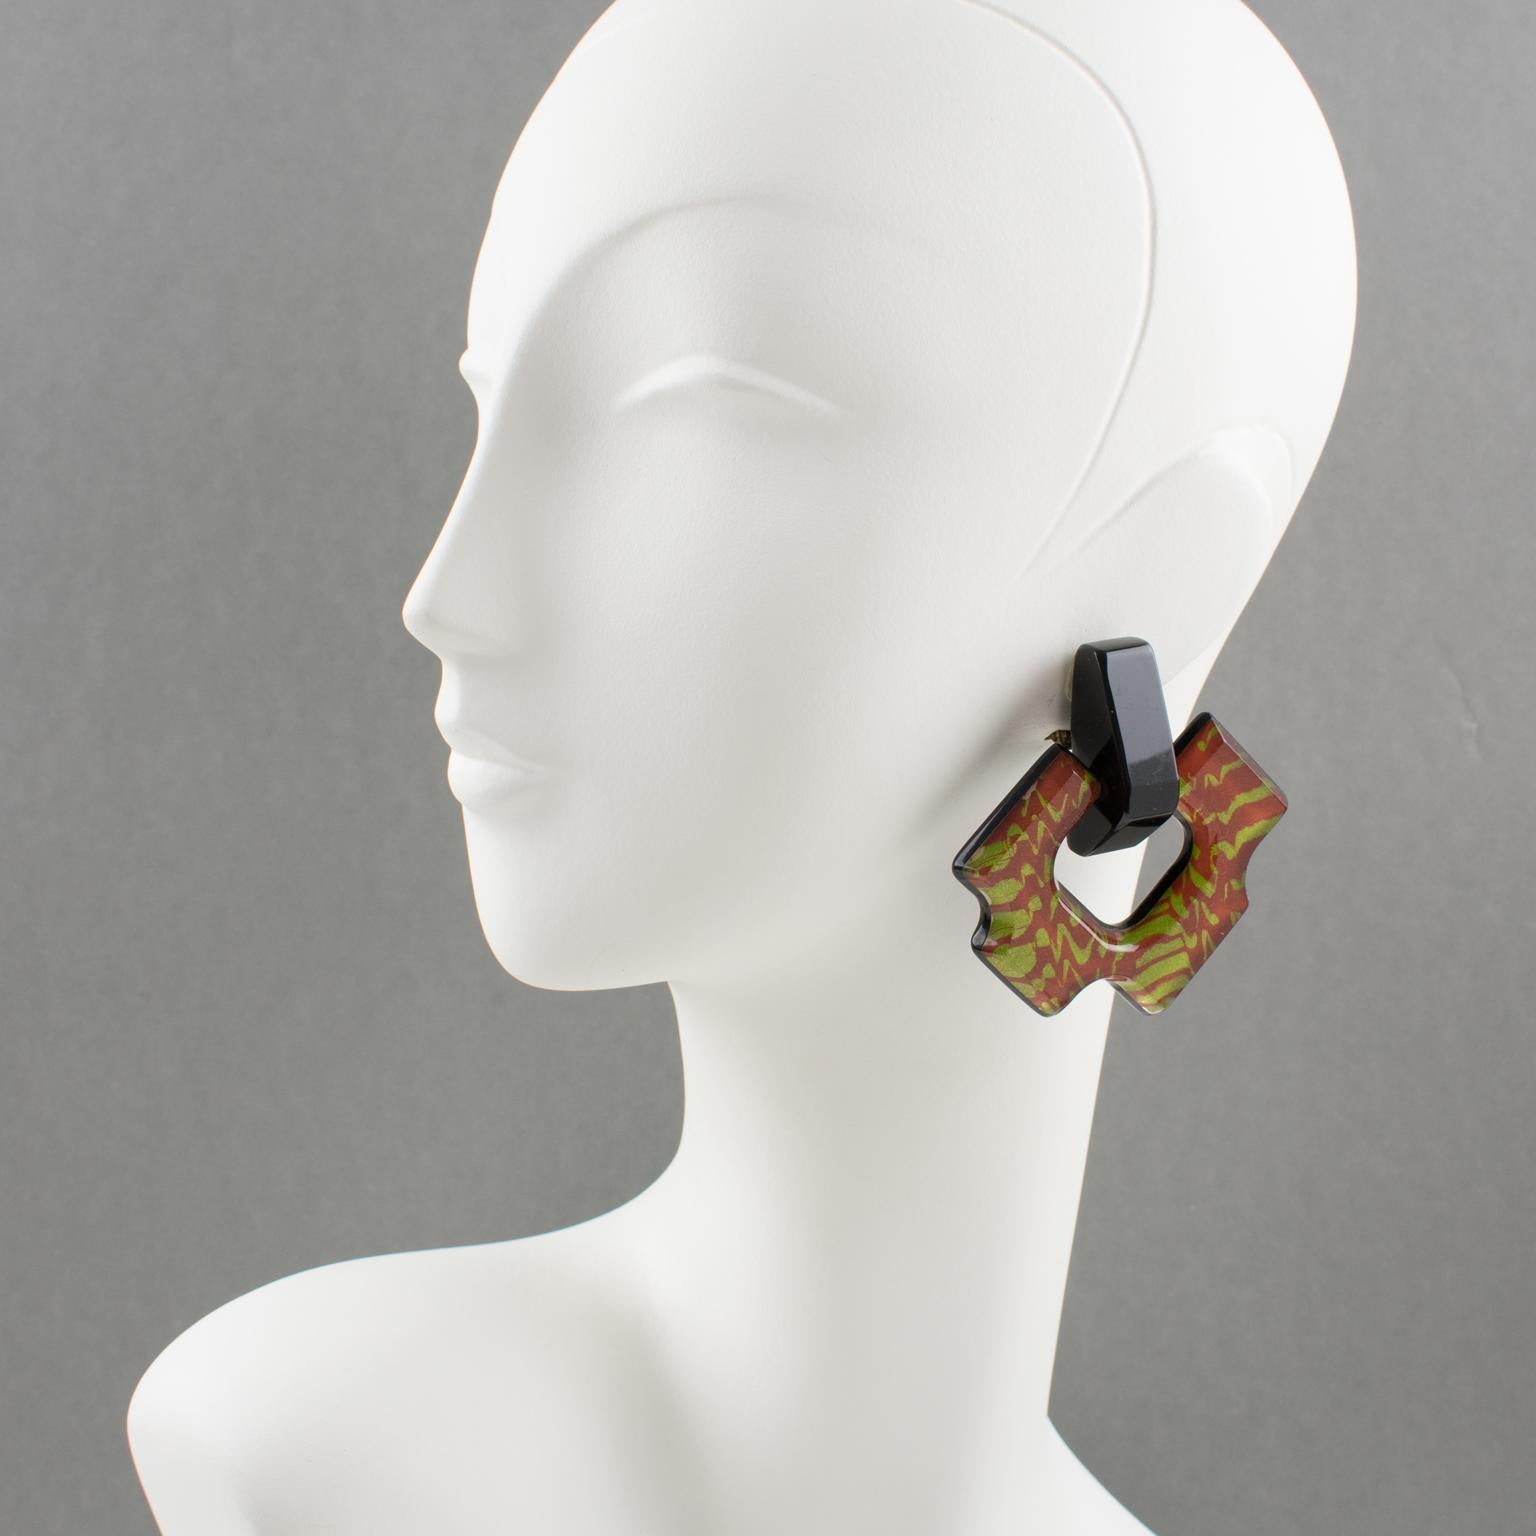 Harriet Bauknight designed these impressive Lucite clip-on earrings for her brand Kaso in the 1980s. The massive dangling shape features an asymmetric door-knocker in licorice black Lucite with colorful glitter effect inclusions. The inclusions